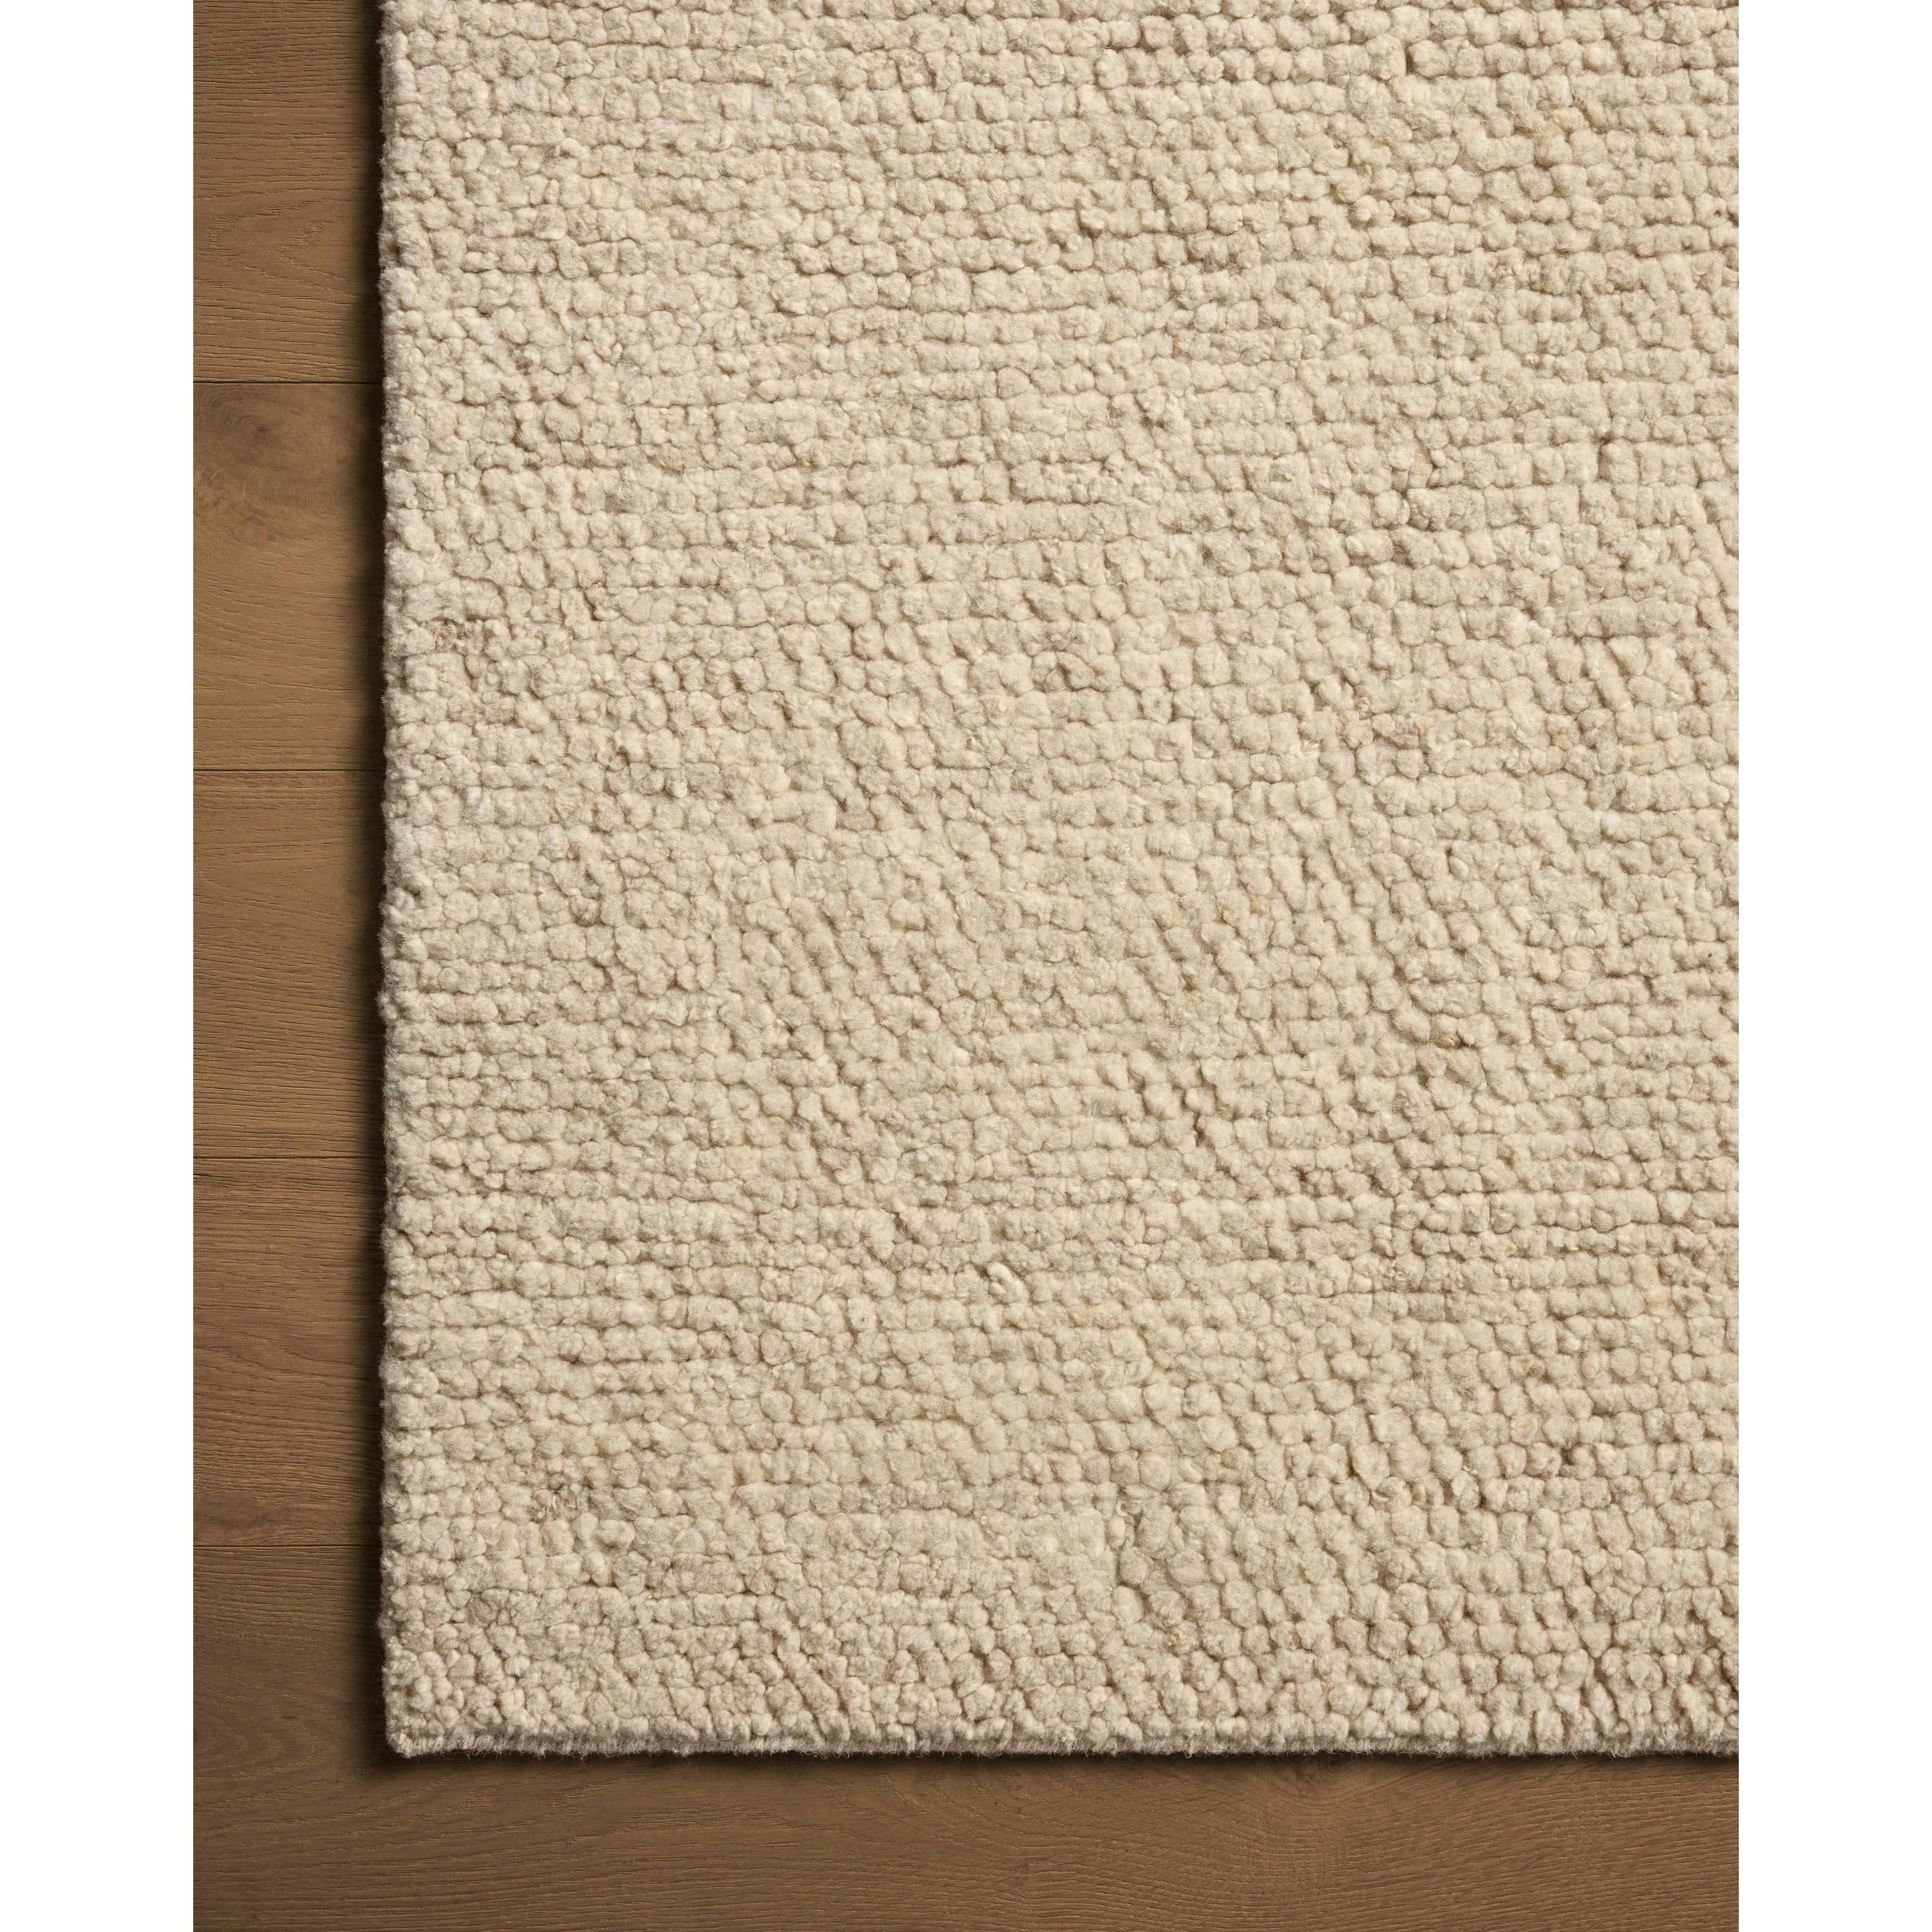 With versatile earth tones and a chunky, hand-knotted texture resembling tiny pebbles, the Frida Bone Rug by Brigette Romanek x Loloi can ground any room with a sense of elevated ease. Each area rug features a subtle nuance in color variation due to the handmade nature of its construction and has a pleasantly nubby softness underfoot. Amethyst Home provides interior design, new home construction design consulting, vintage area rugs, and lighting in the Dallas metro area.